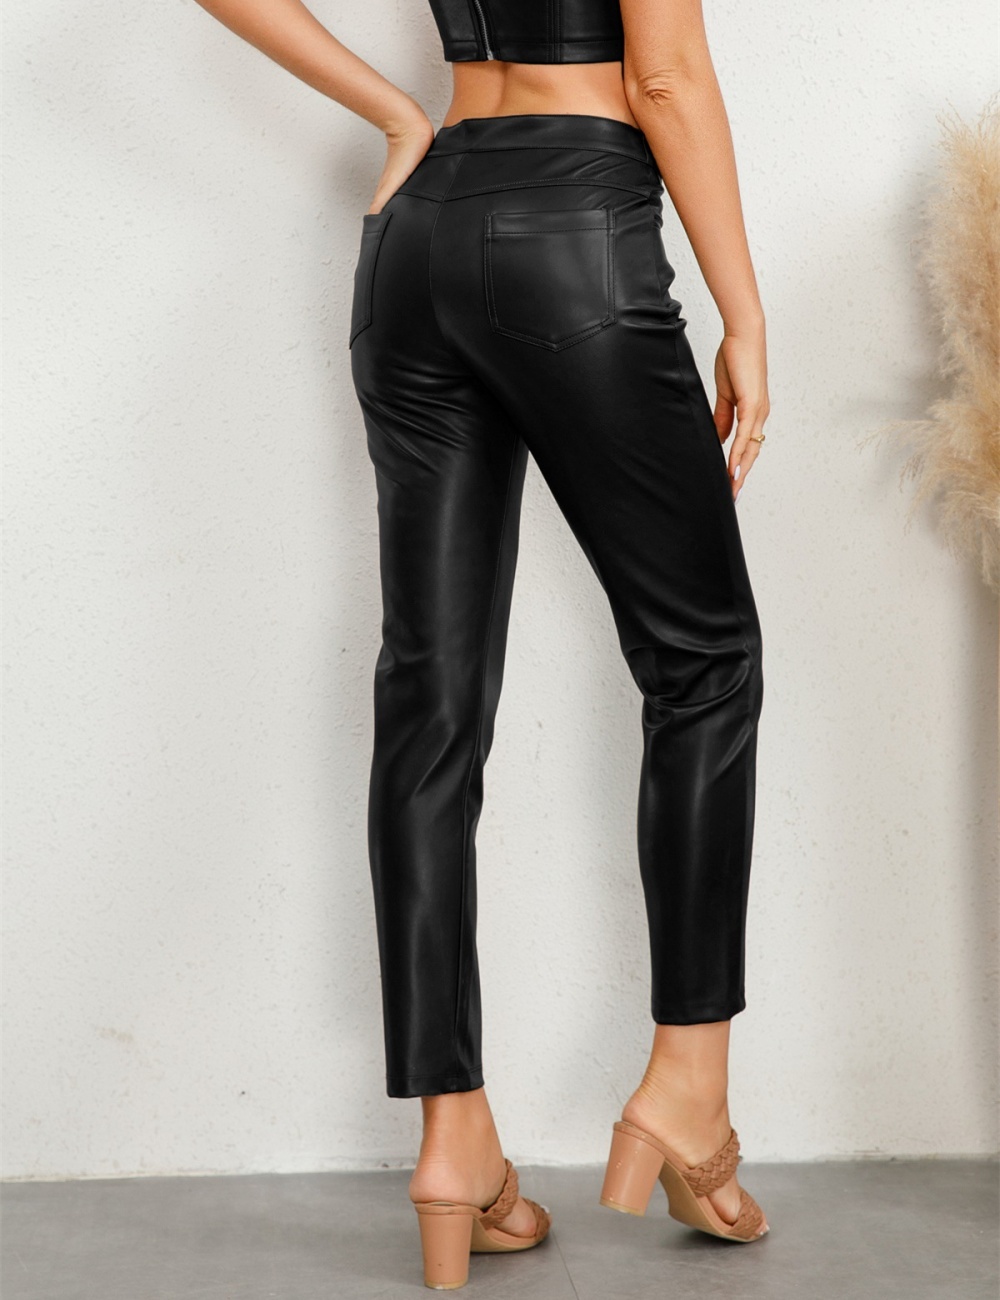 Fashion autumn and winter leather pants low-waist pants